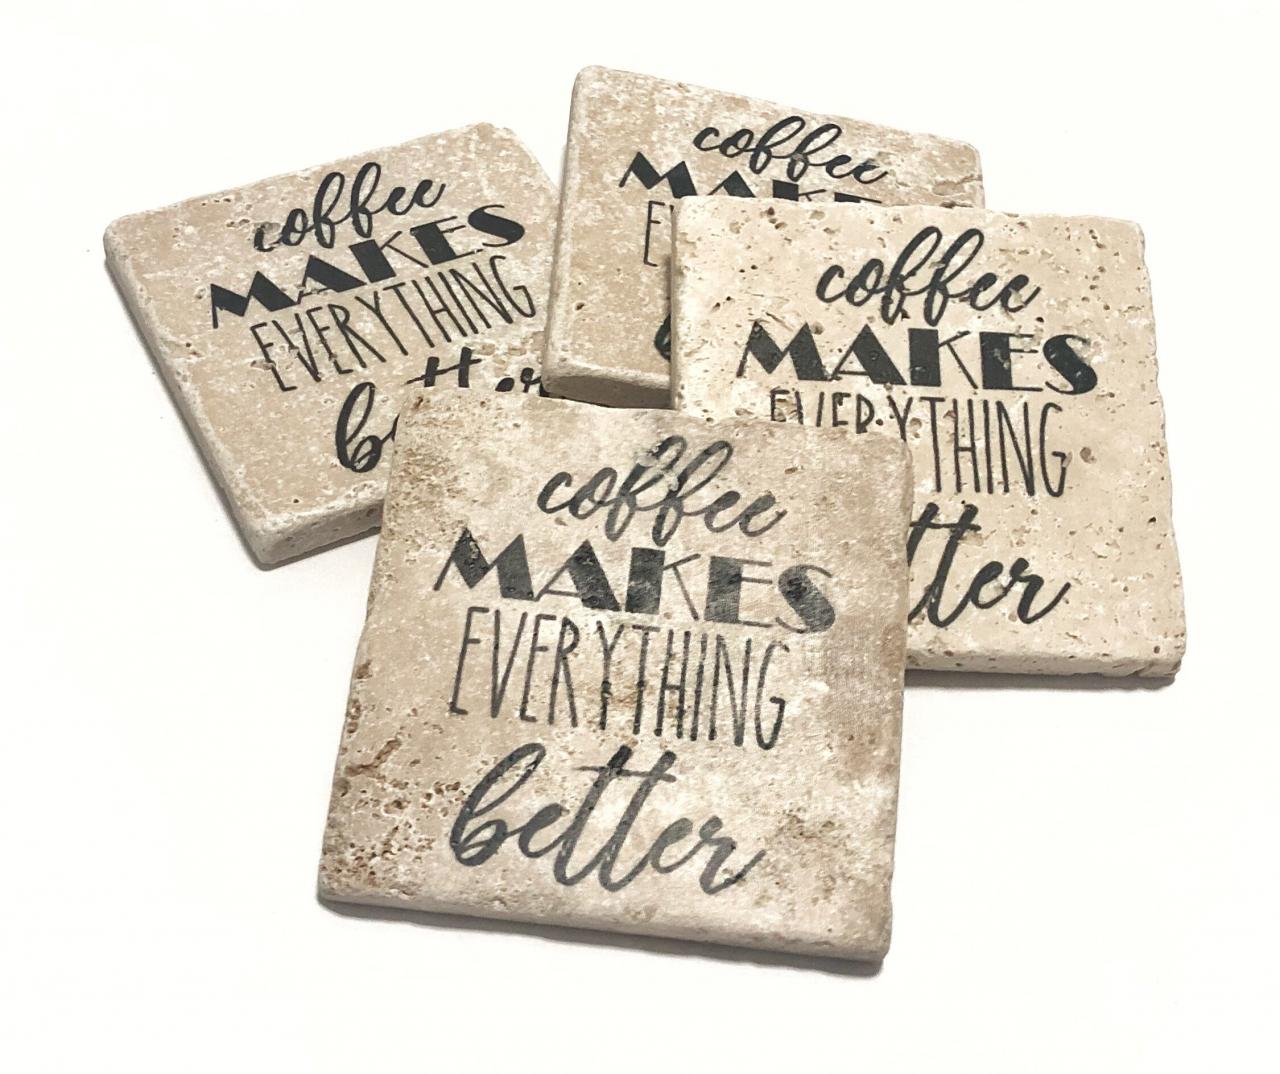 Coffee Makes Everything Better, Natural Stone Coasters, Set Of 4, Full Cork Bottom, Coffee Coasters, Rustic Decor, Travertine